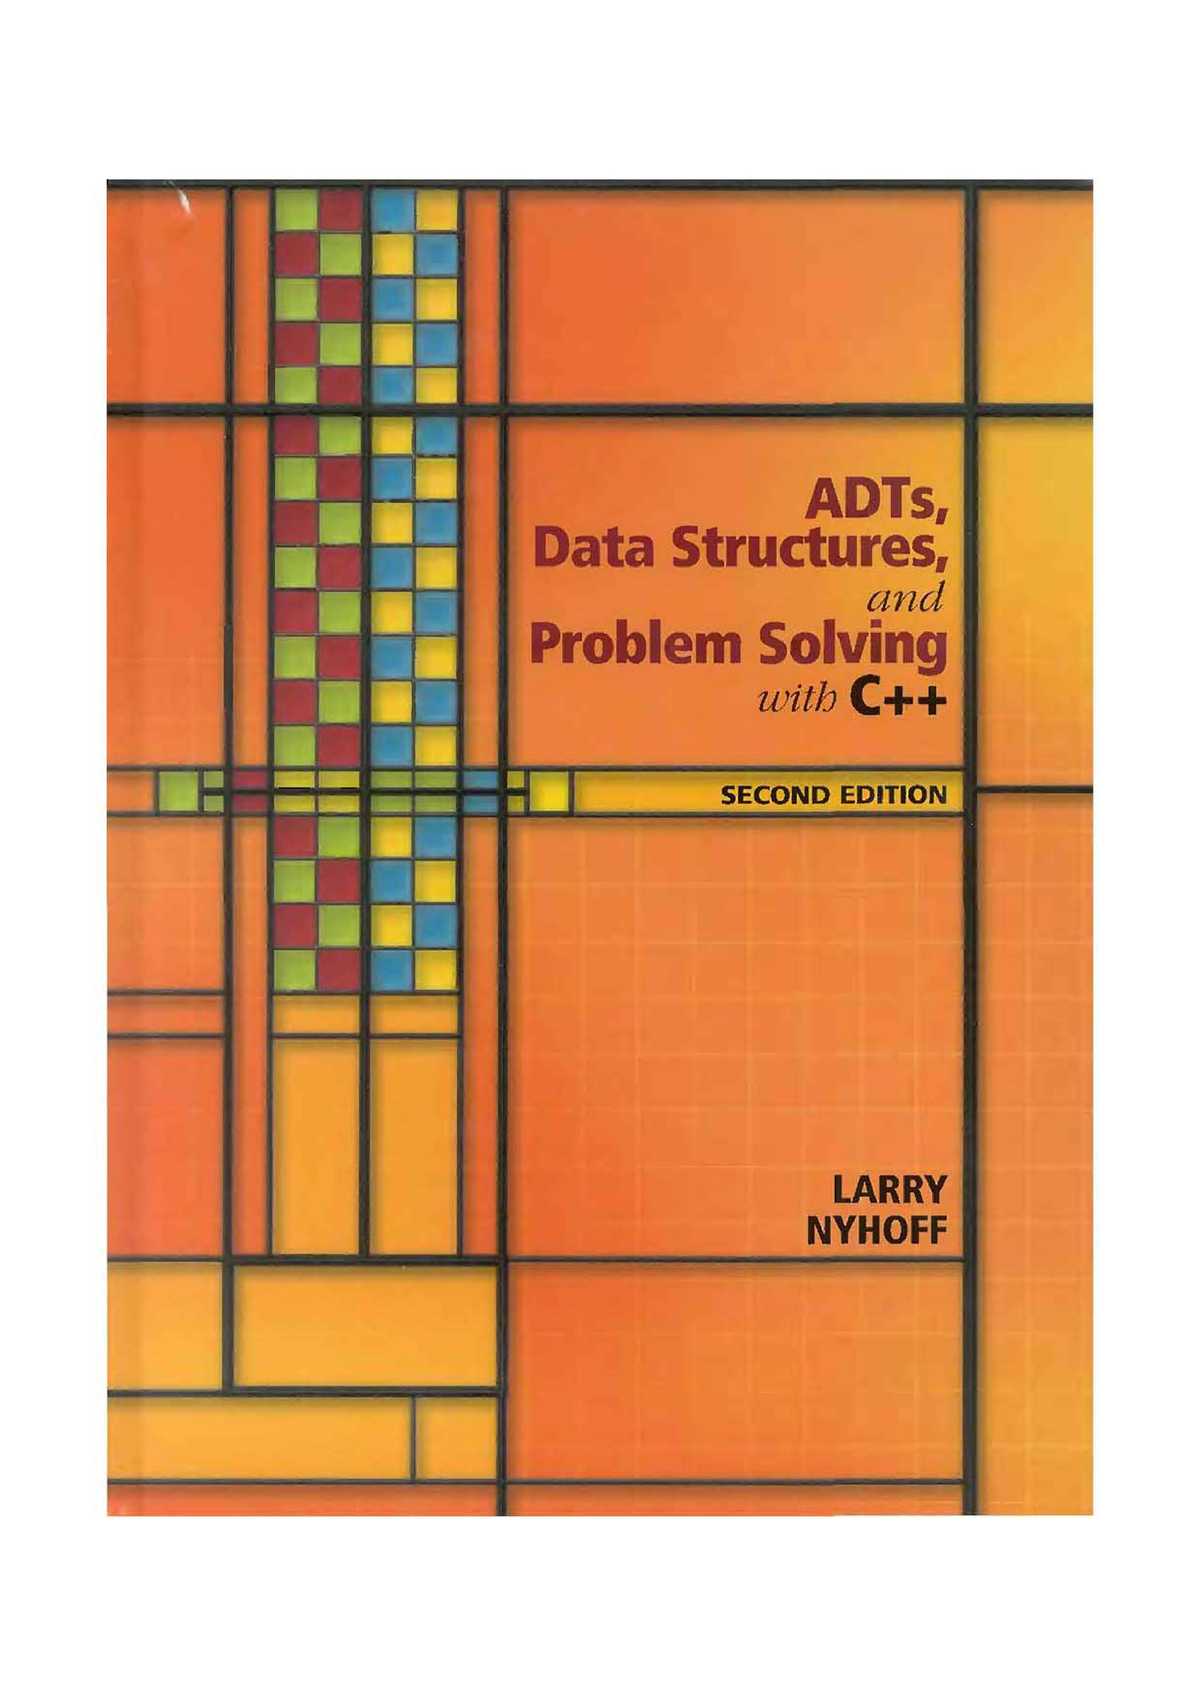 adts data structures and problem solving with c larry nyhoff pdf